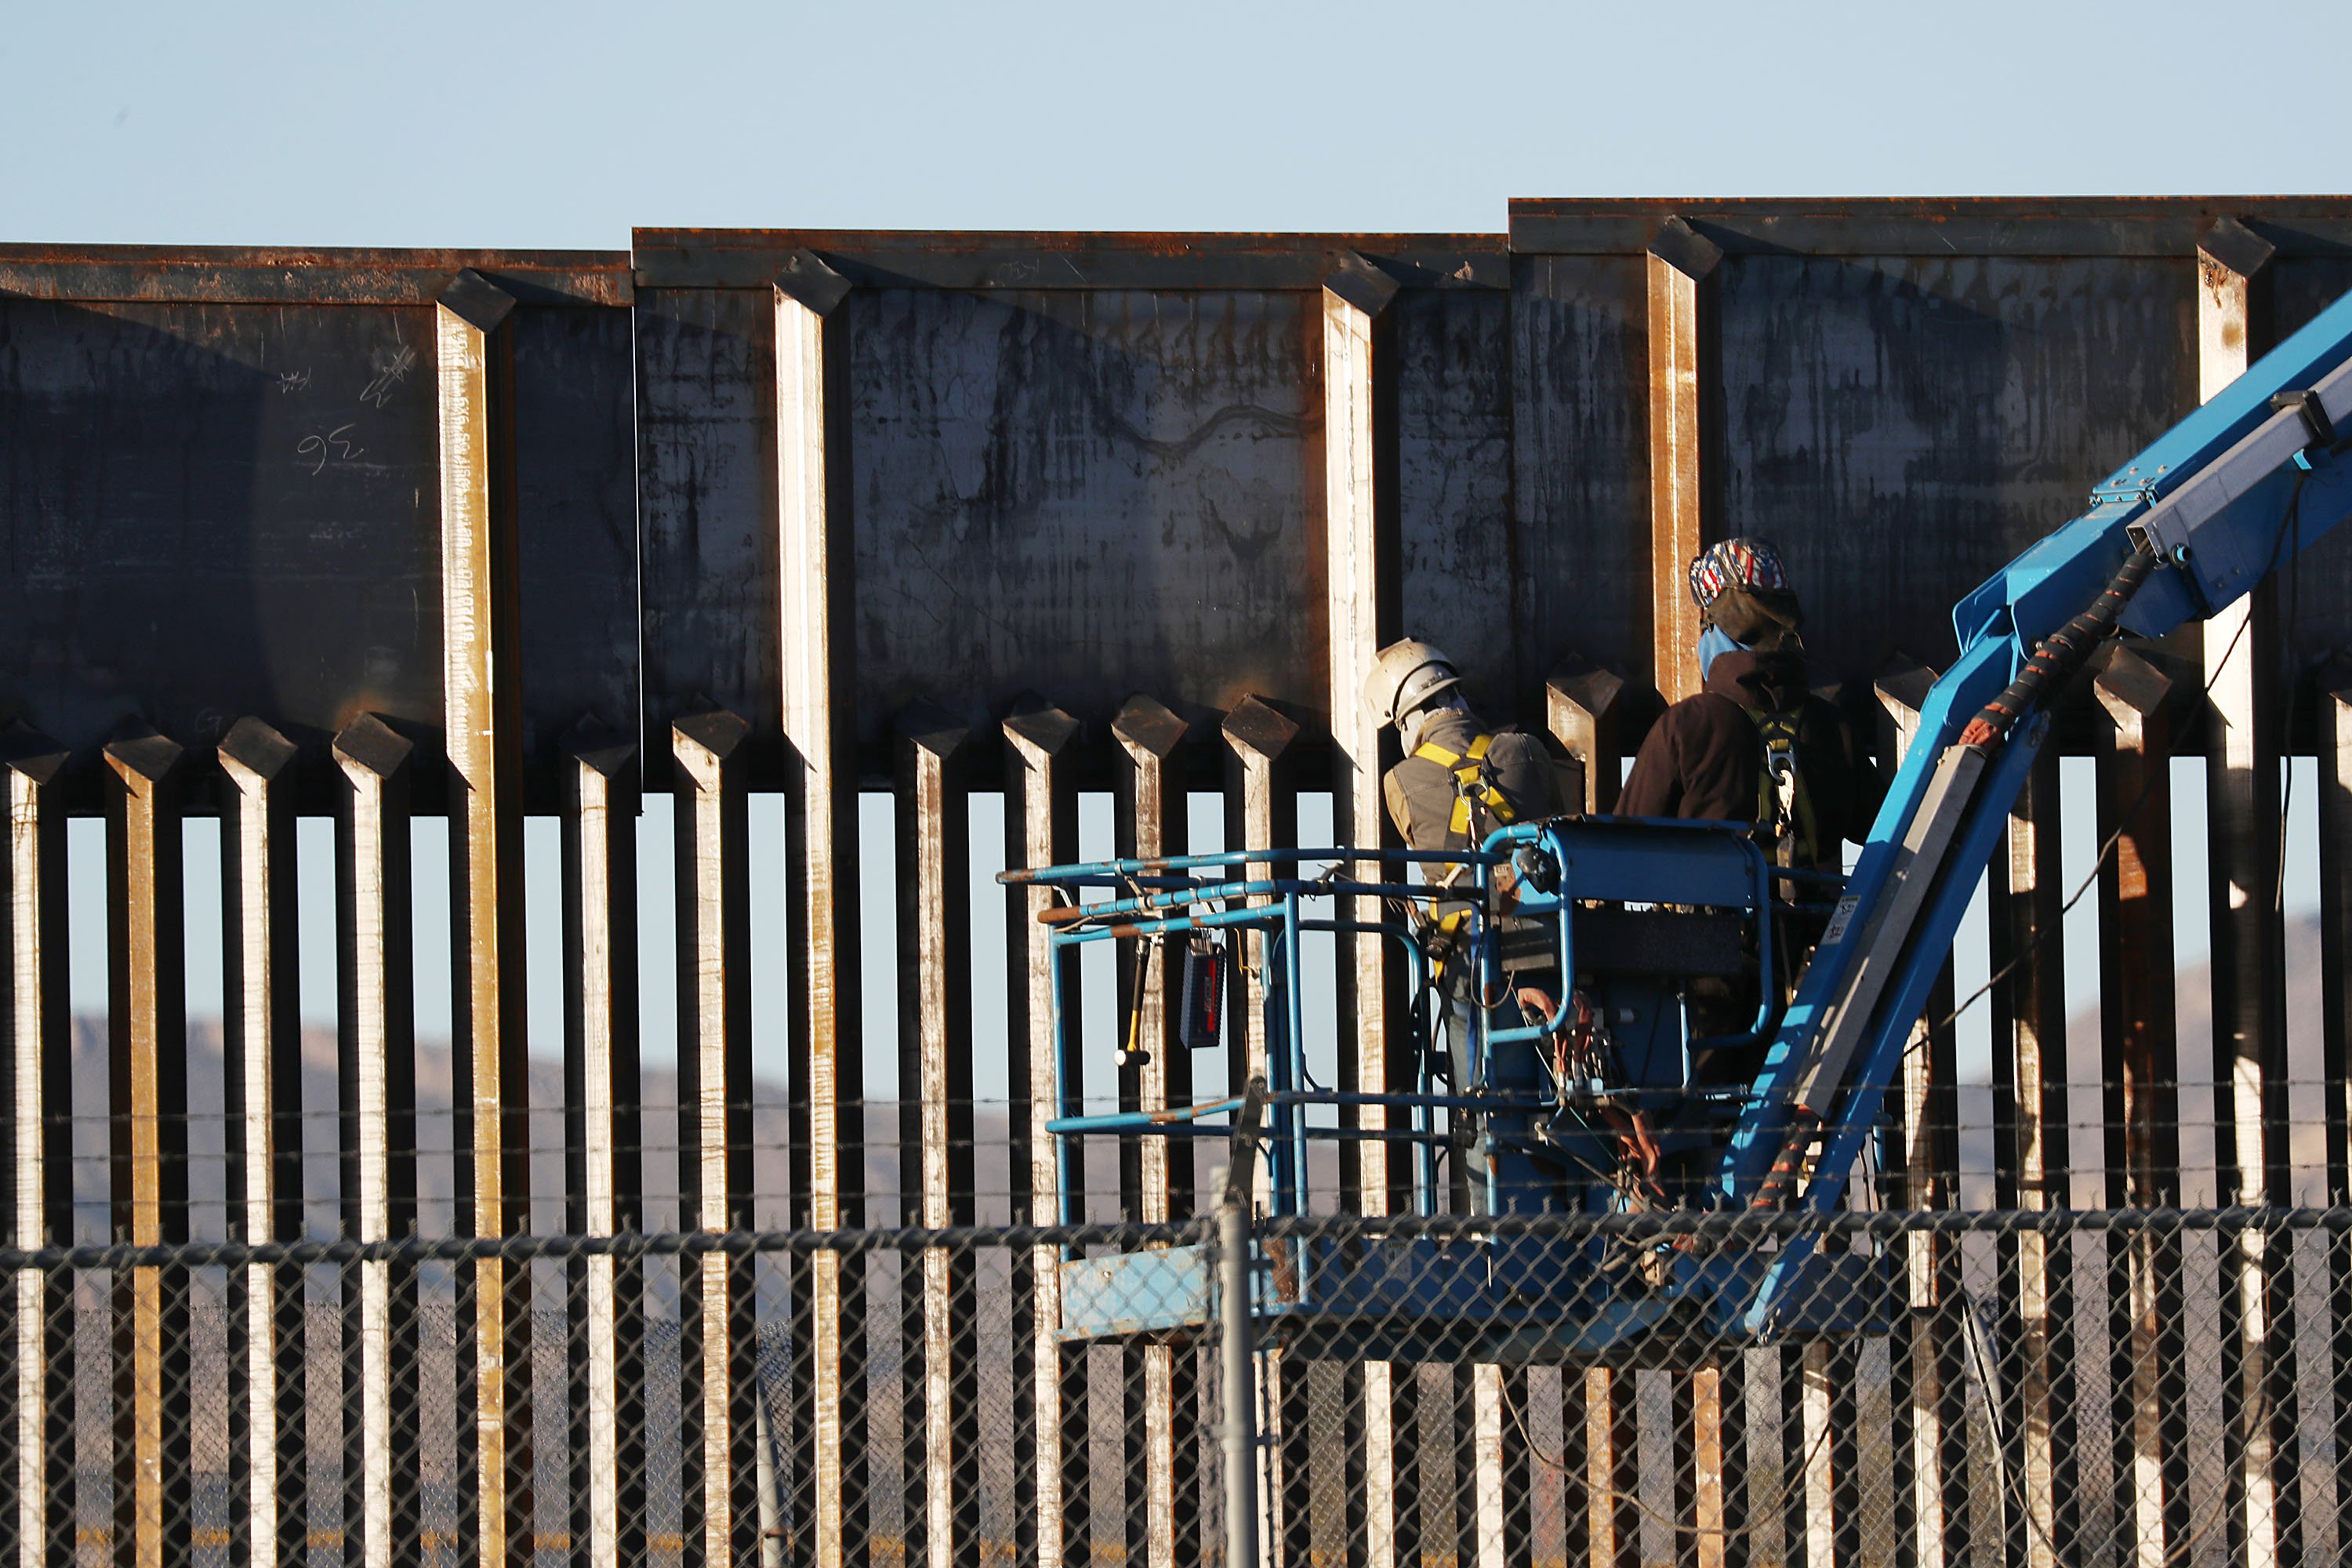 People work on the U.S./ Mexican border wall on February 12, 2019 in El Paso, Texas. (Joe Raedle/Getty Images)